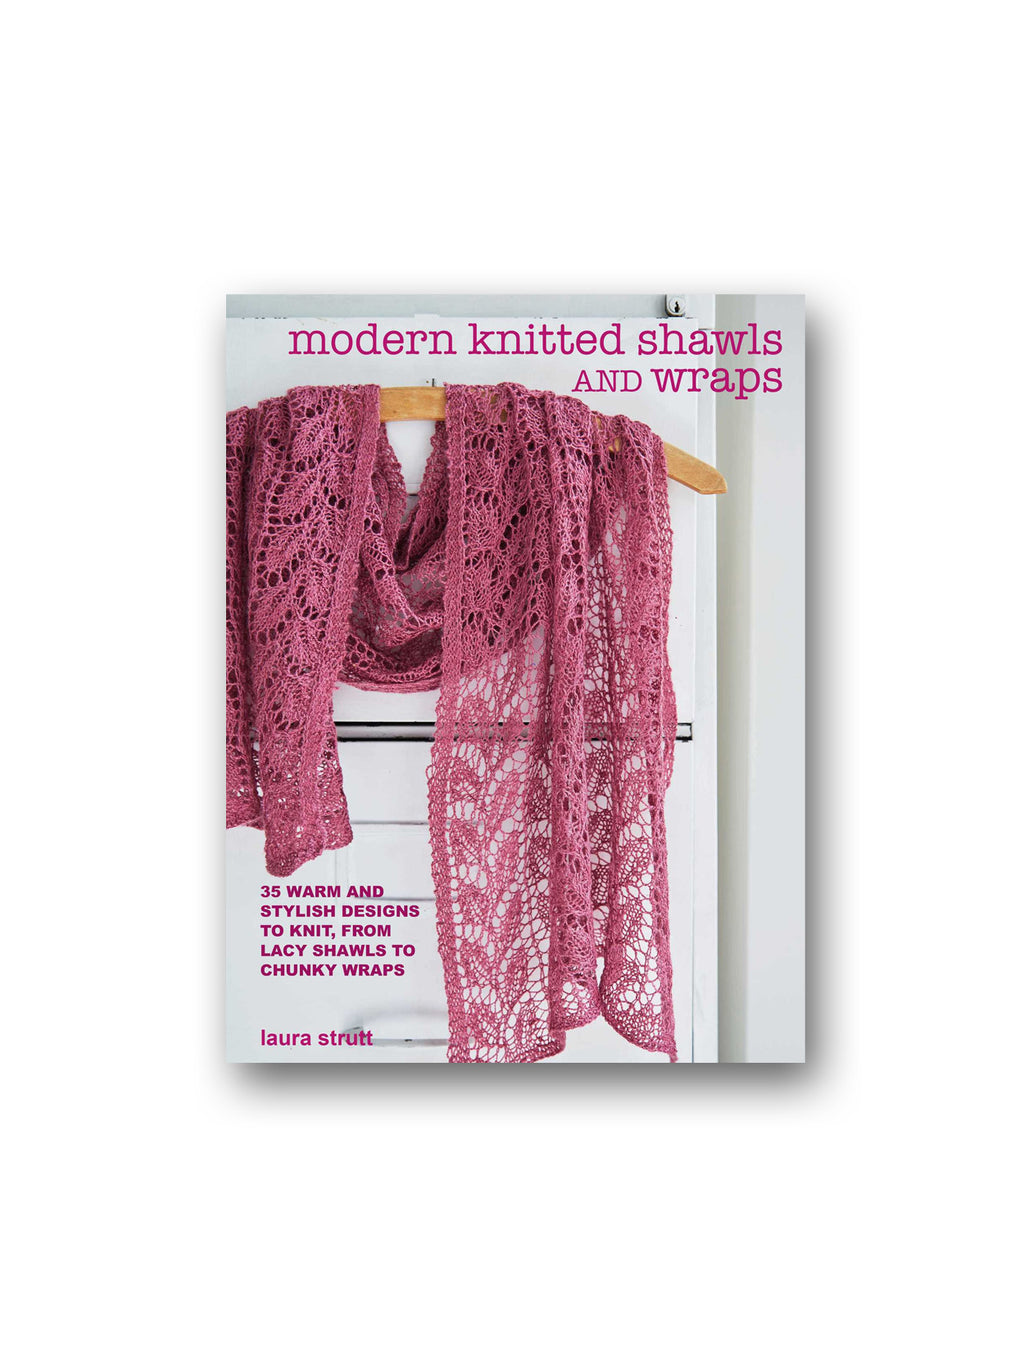 Modern Knitted Shawls and Wraps : 35 Warm and Stylish Designs to Knit, from Lacy Shawls to Chunky Wraps